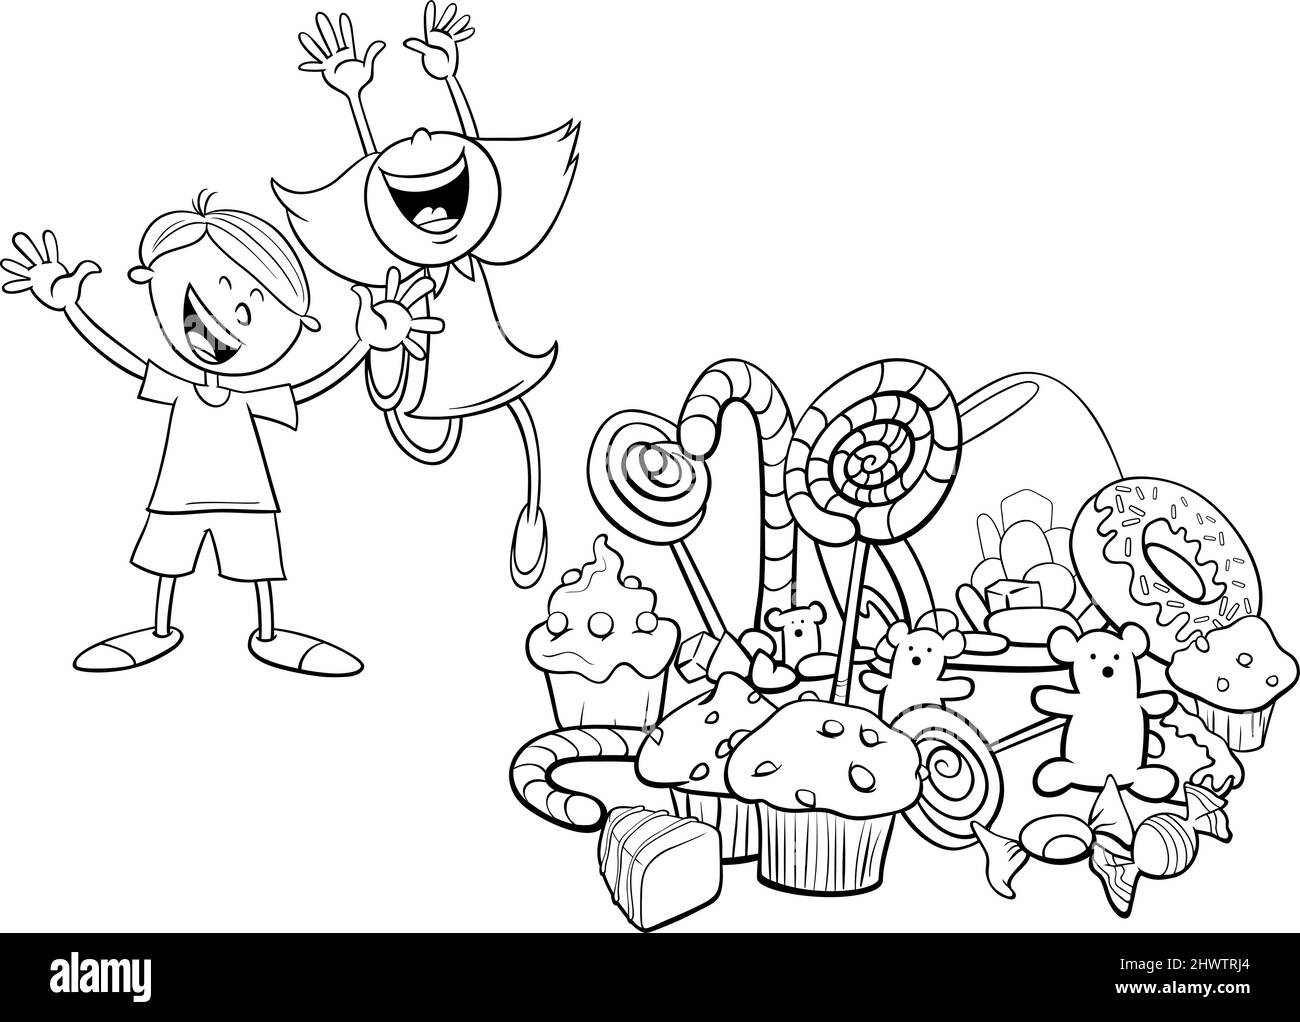 Black and white cartoon illustration of children characters and a pile of sweets coloring book page Stock Vector